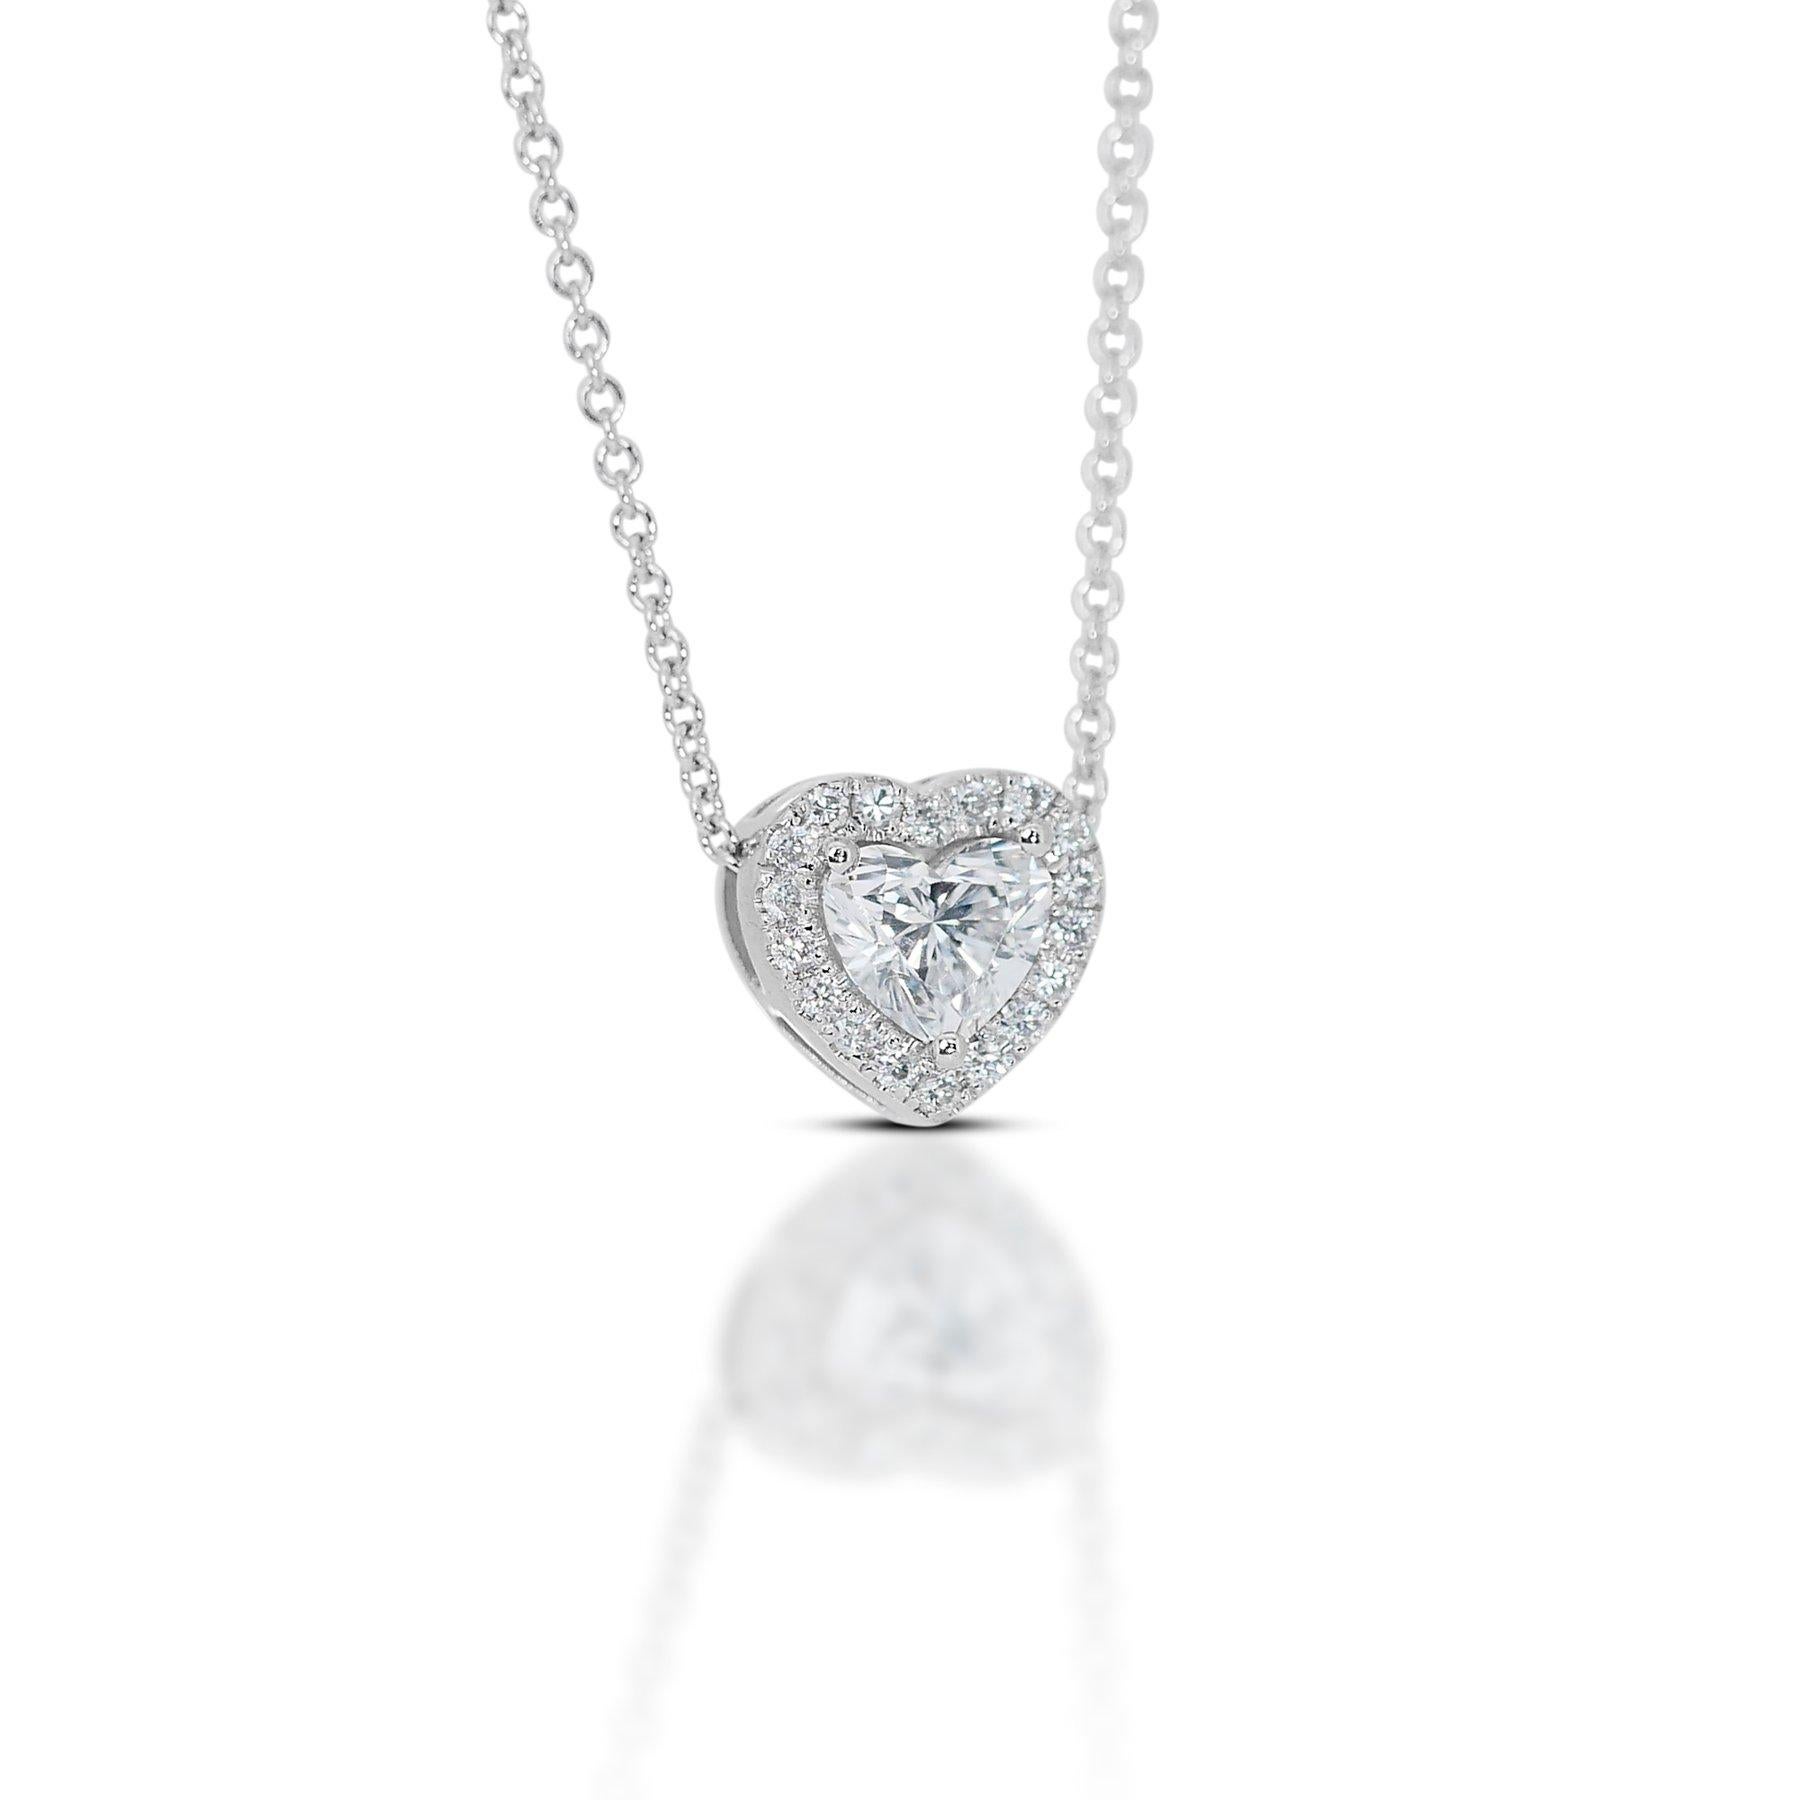 Enchanting 1.14ct Diamonds Halo Necklace in 18k White Gold - GIA Certified In New Condition For Sale In רמת גן, IL